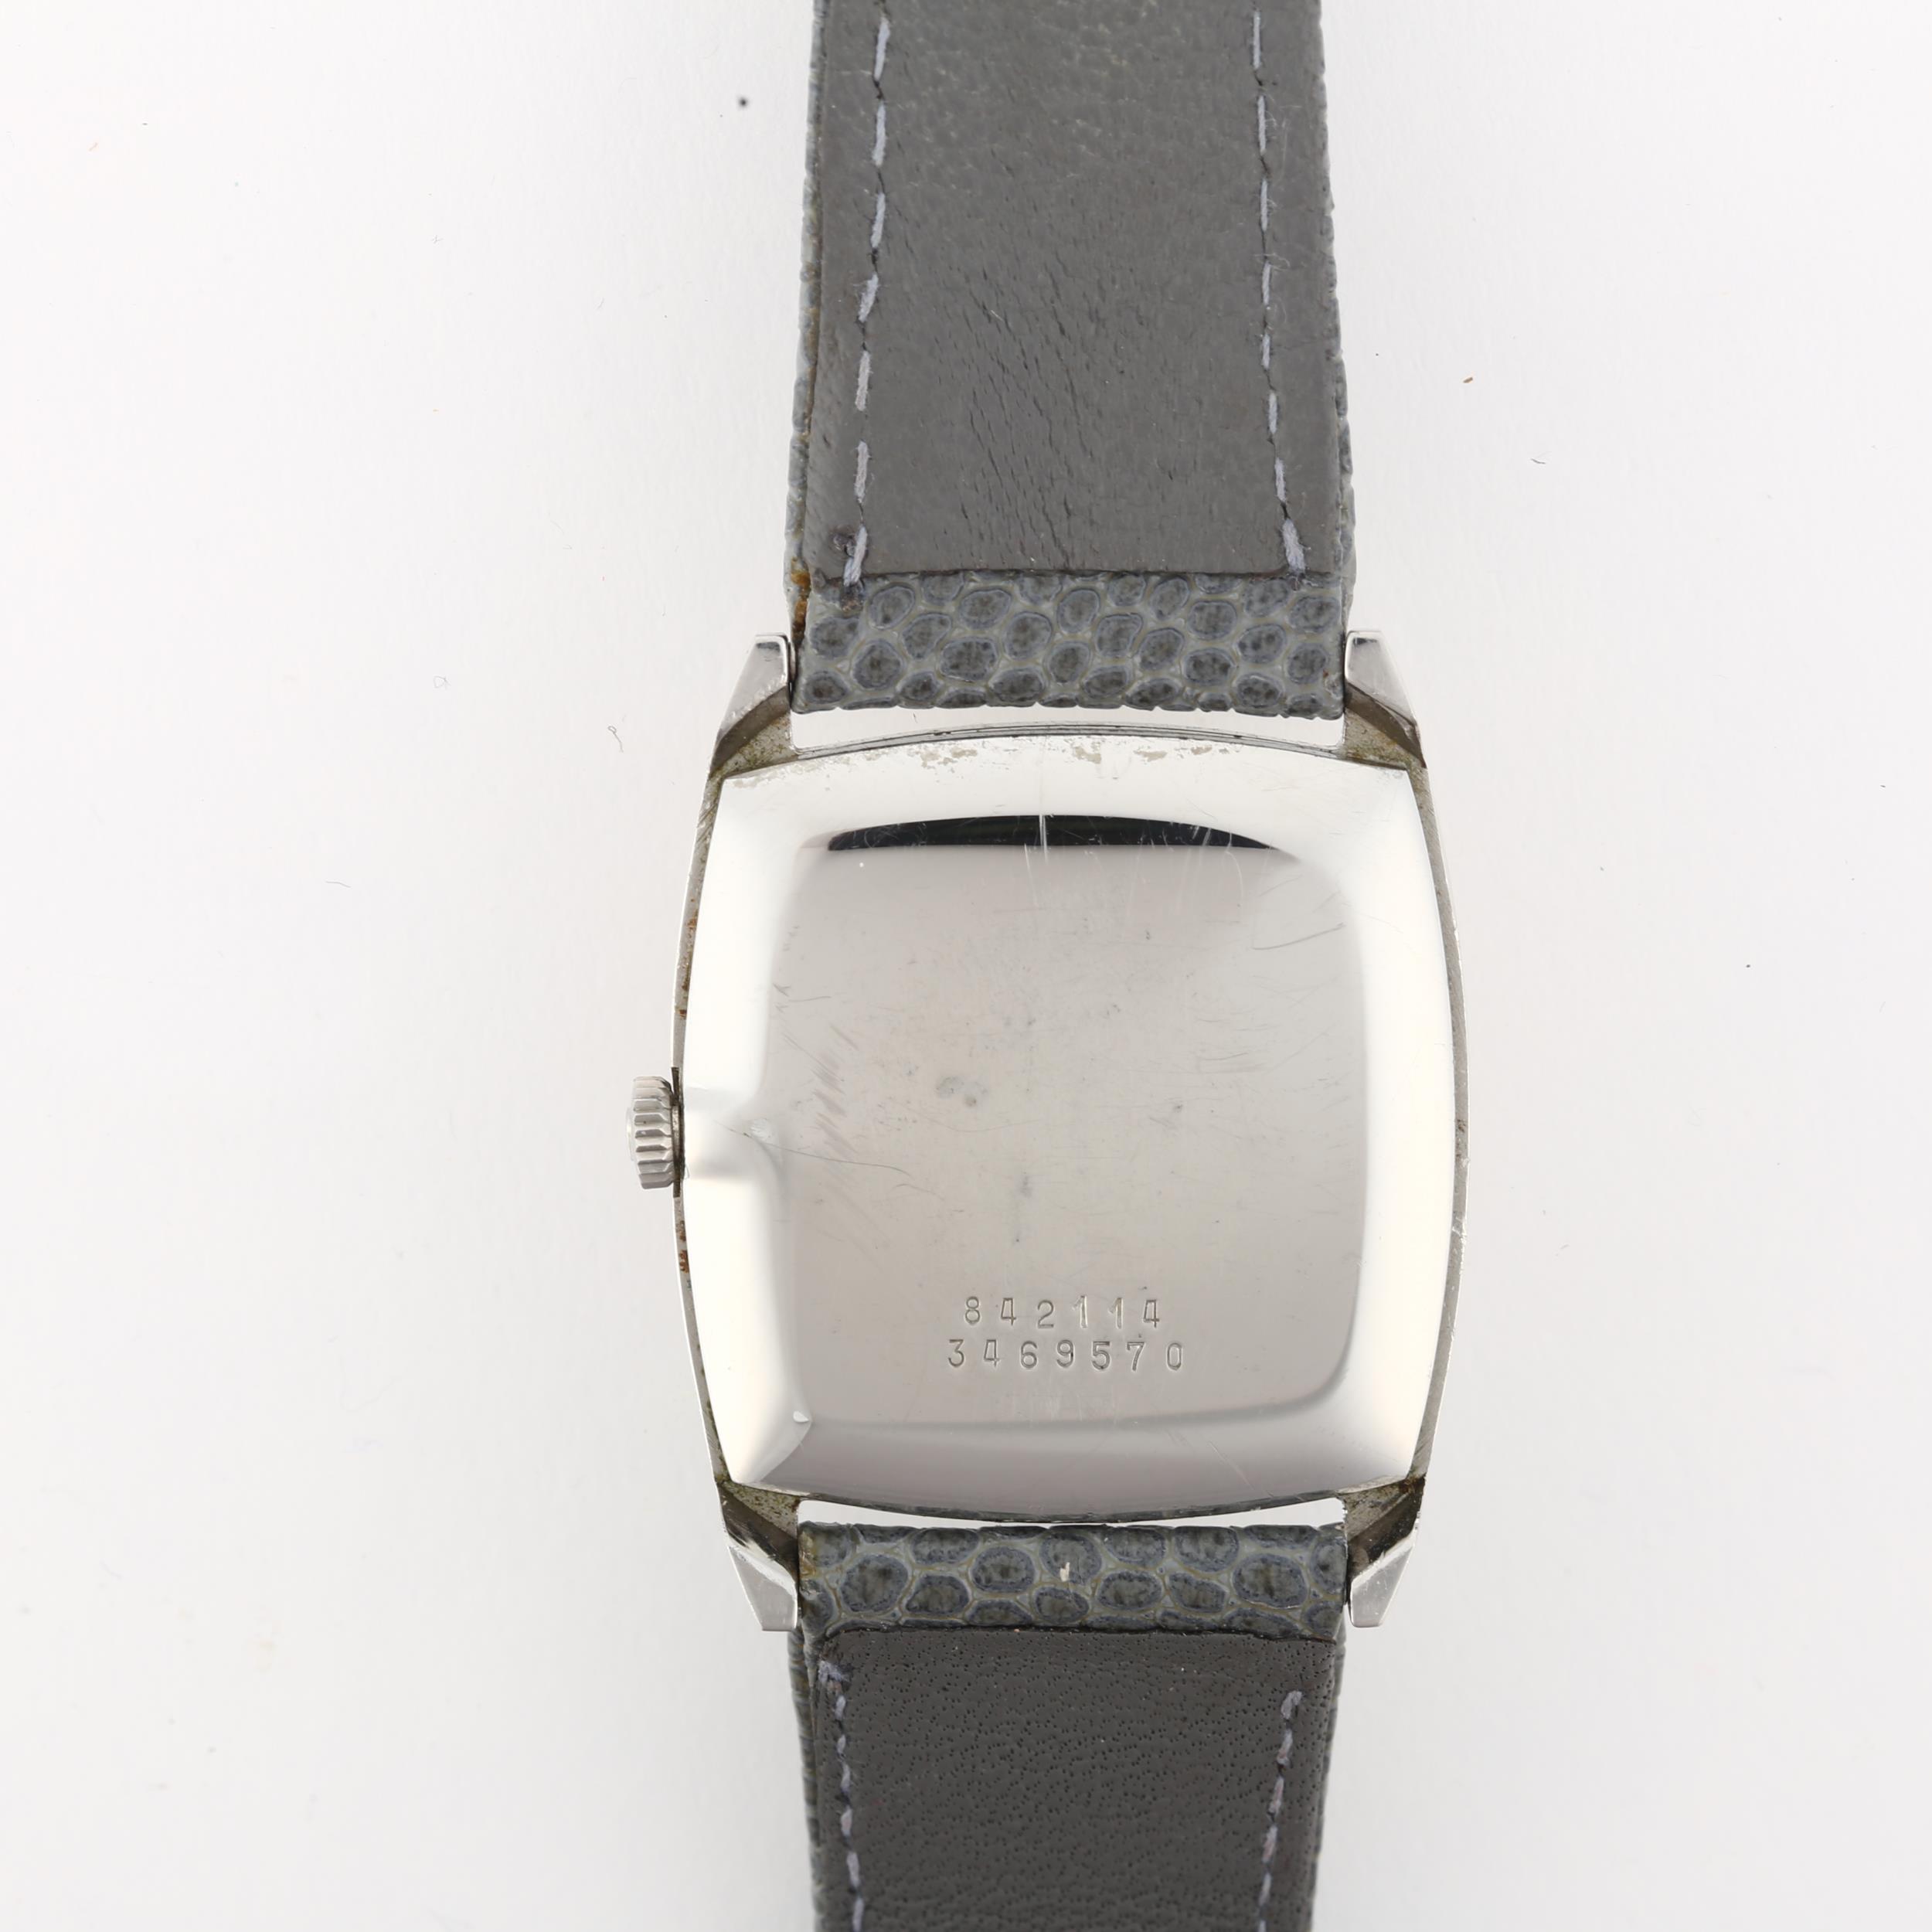 UNIVERSAL GENEVE - a stainless steel Tank mechanical wristwatch, ref. 842114, circa 1960s, - Image 4 of 5